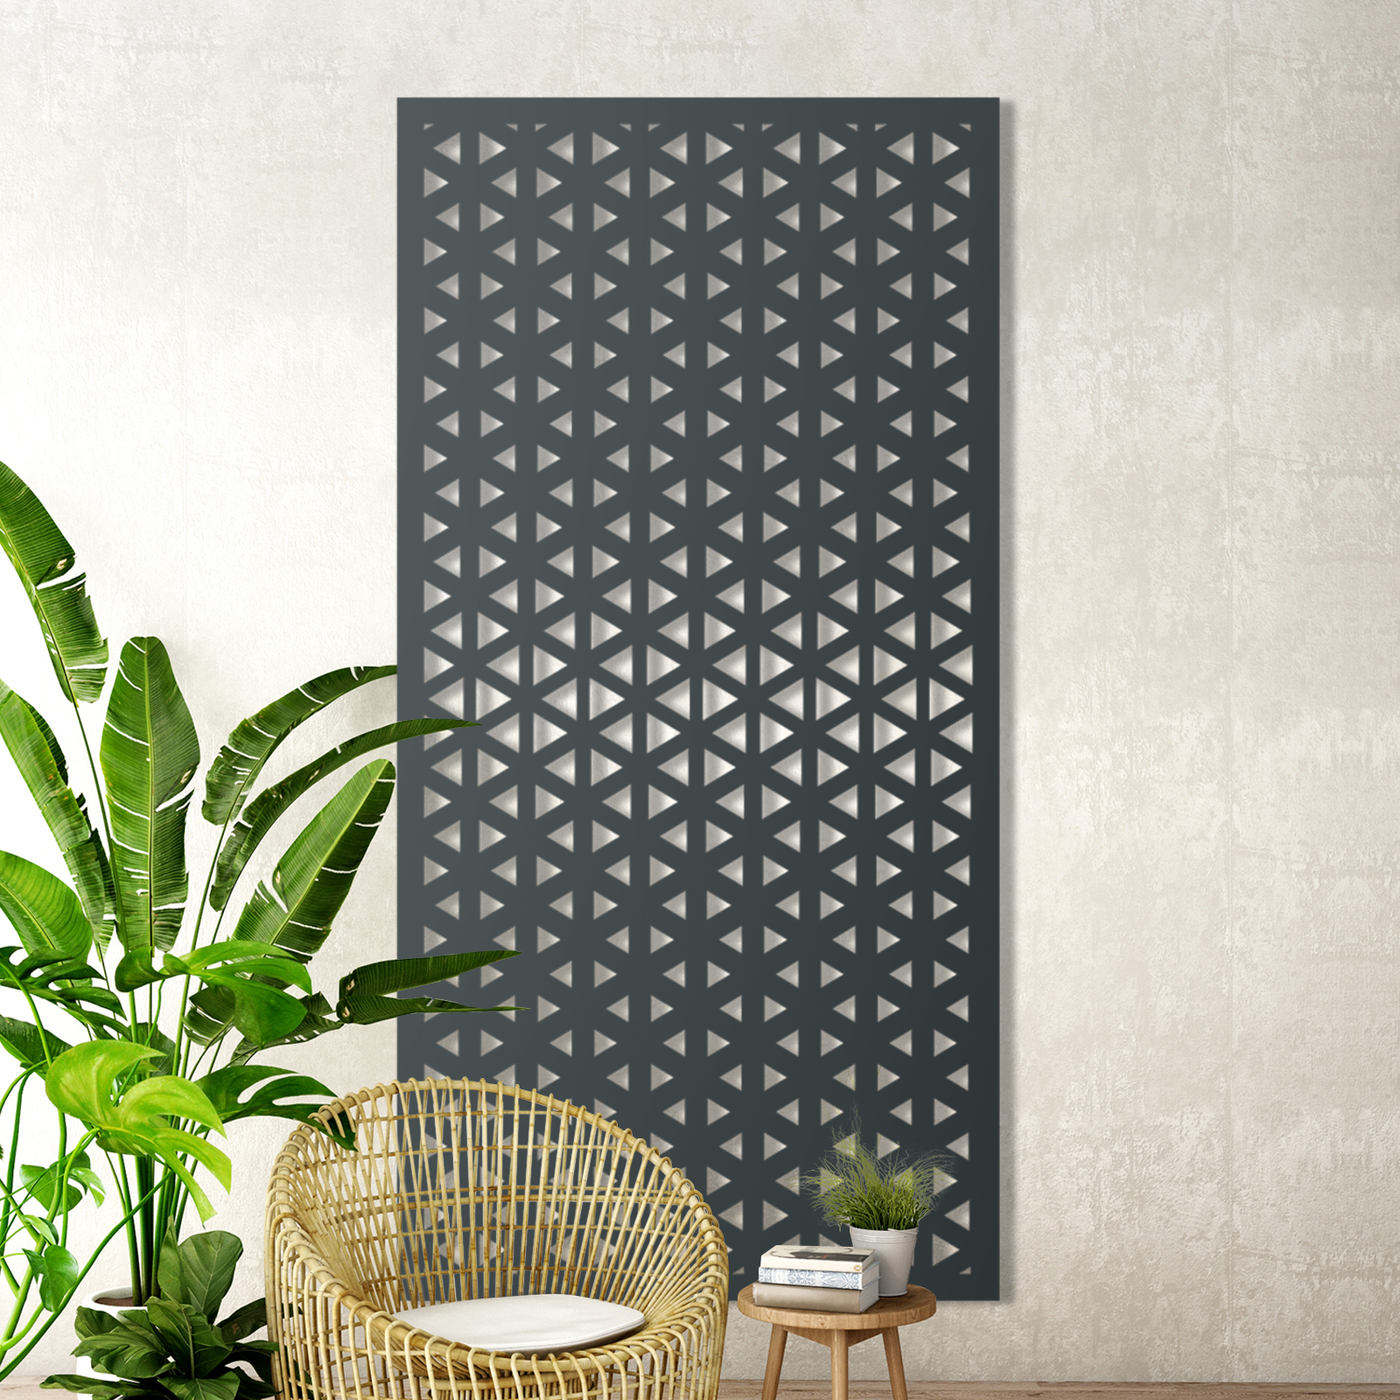 Triad Metal Garden Screen: Get the Privacy You Need